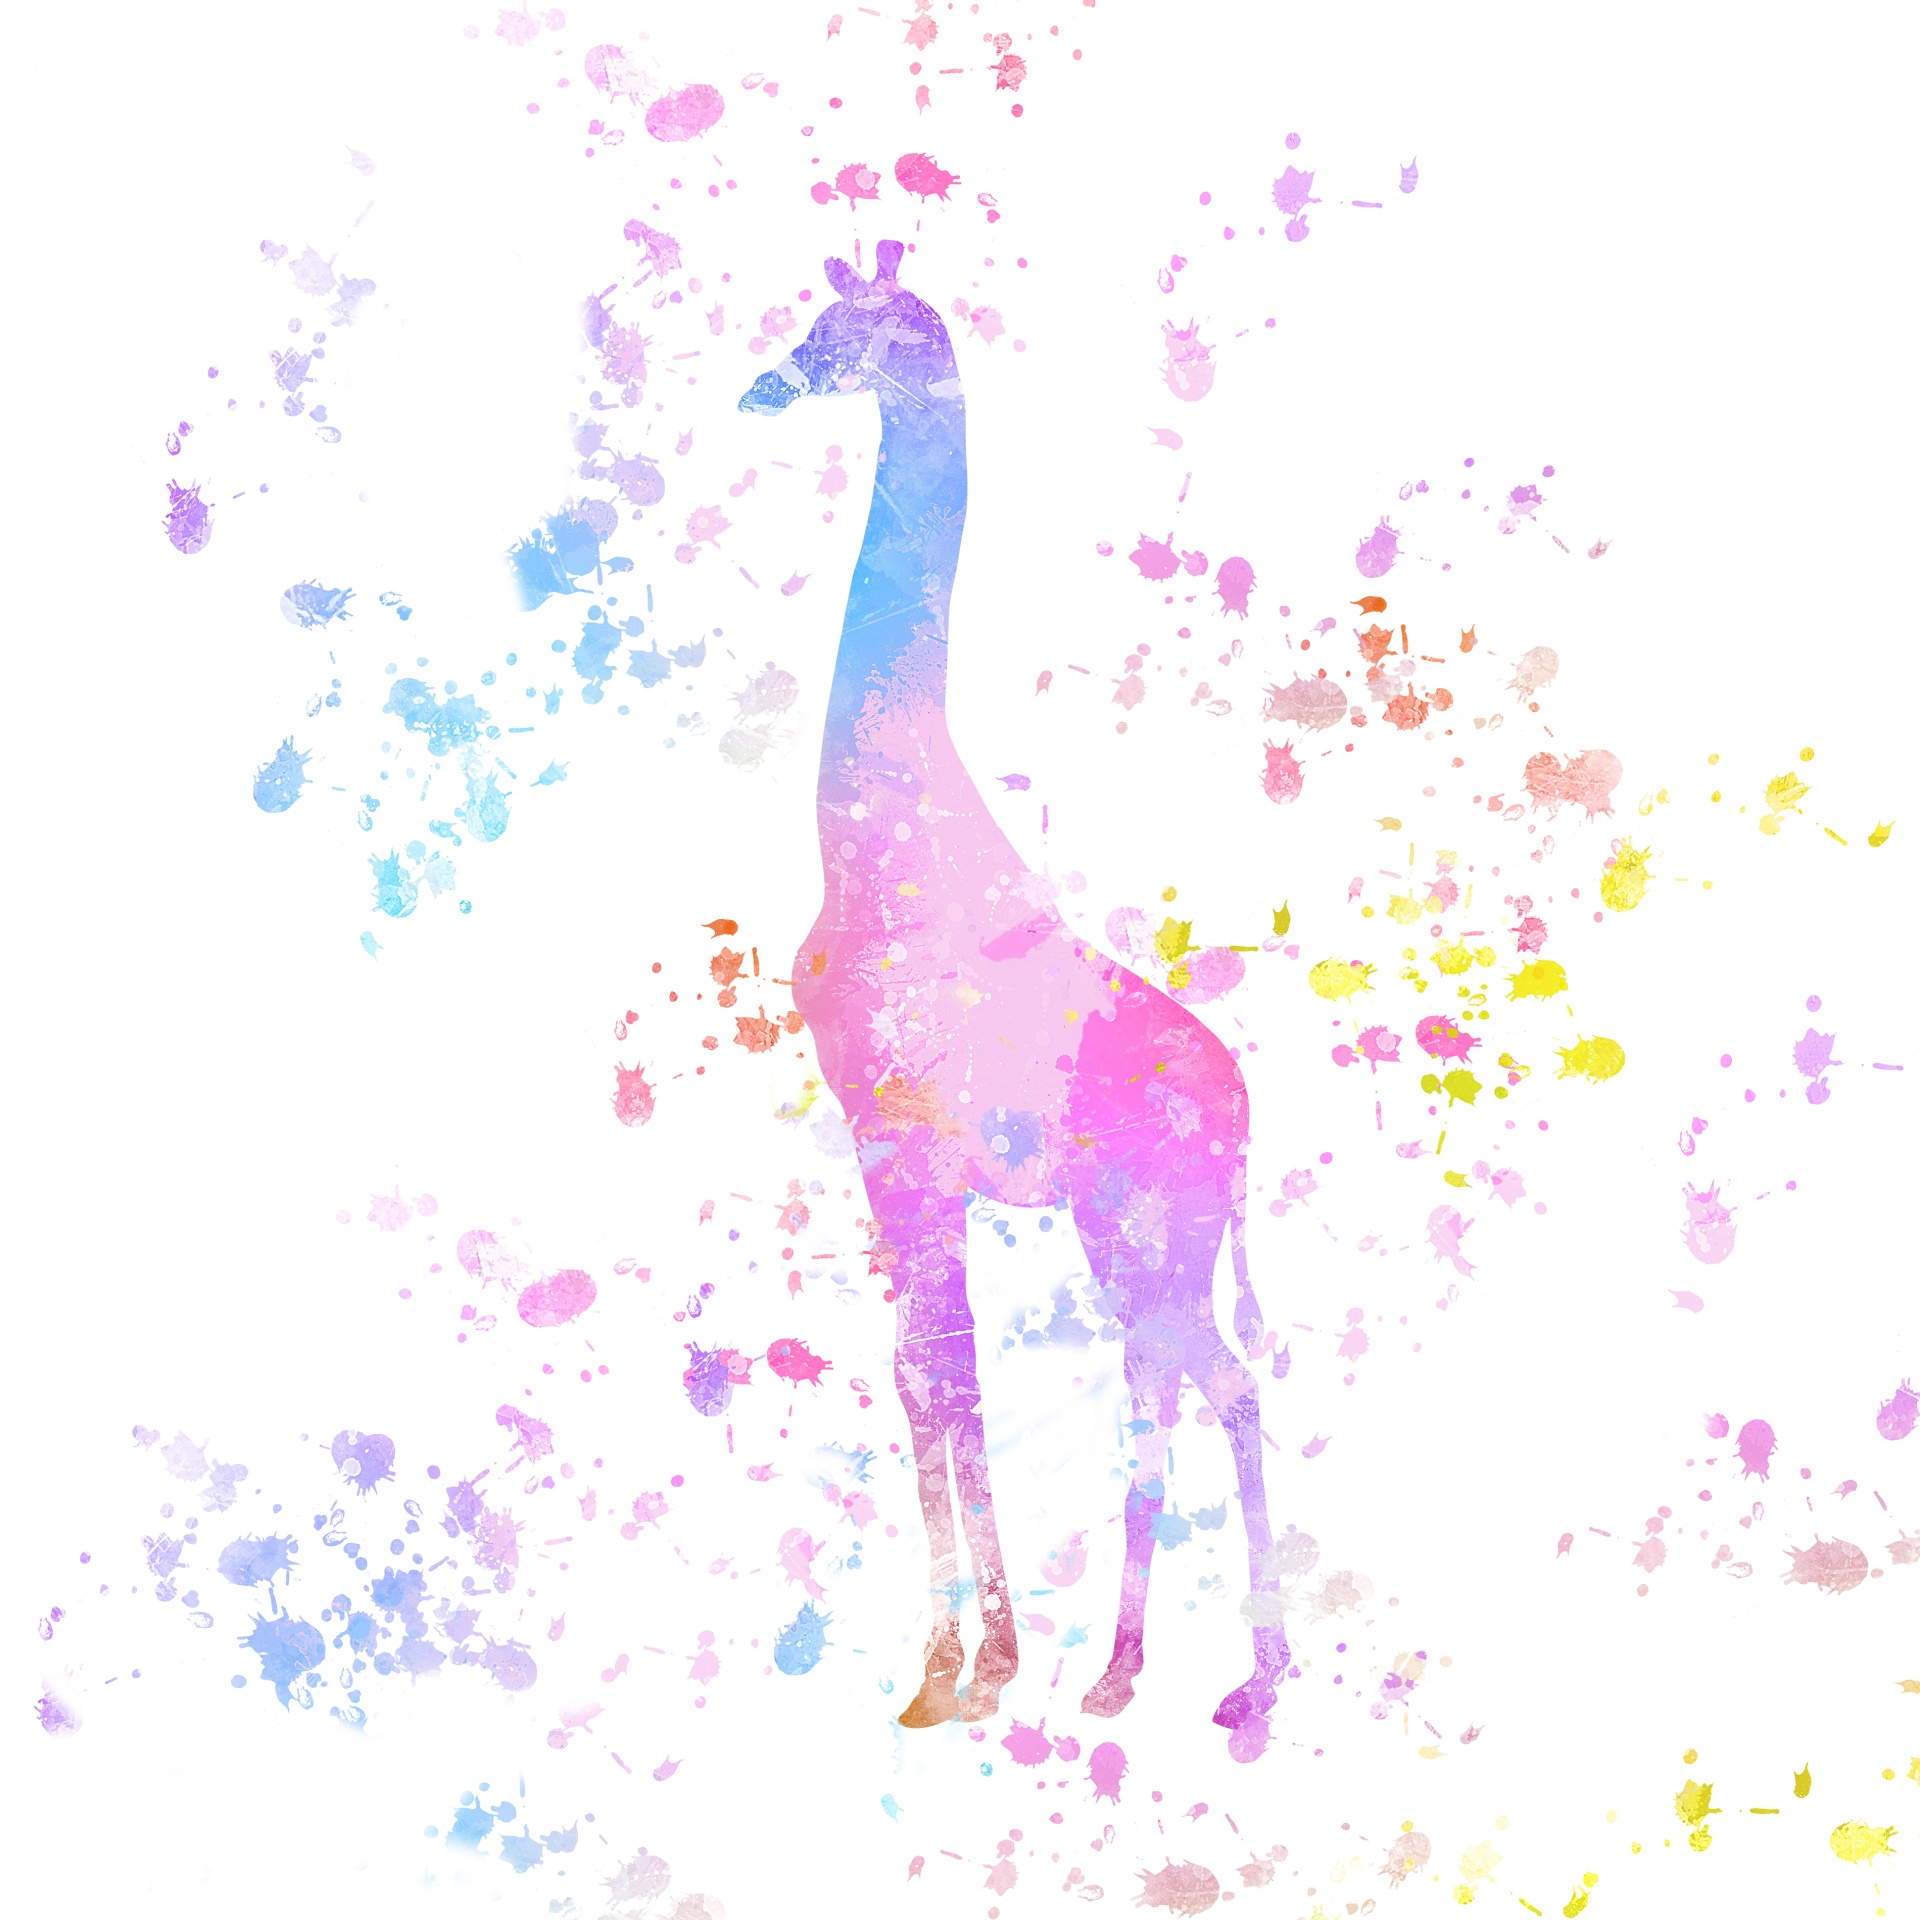 Colorful giraffe with watercolor paint or ink splatters